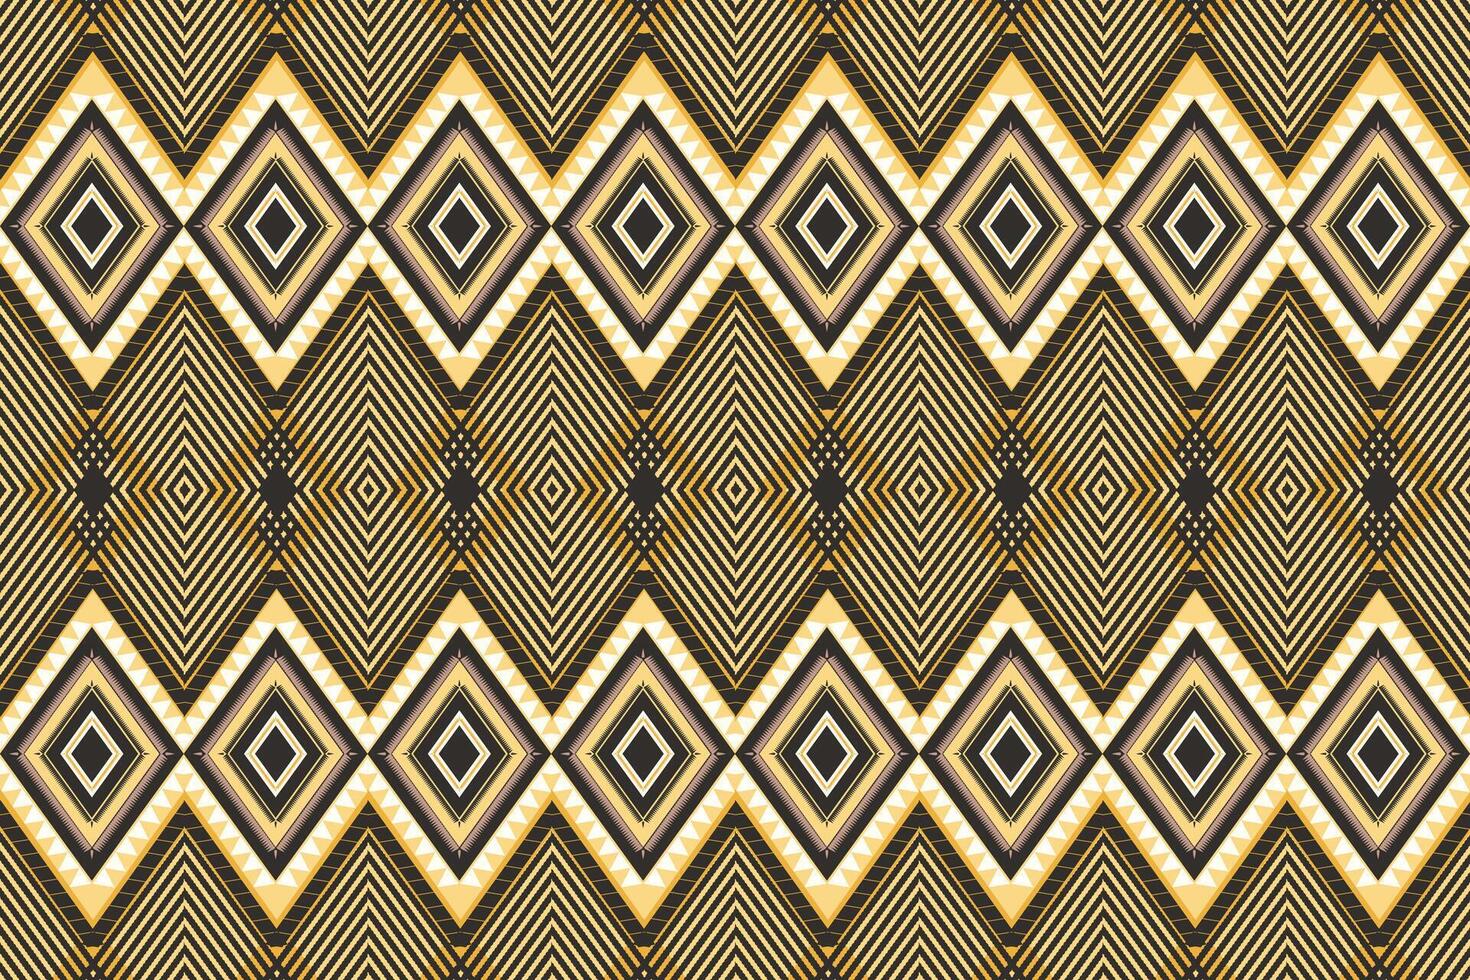 seamless pattern with shapes Geometric ethnic oriental ikat pattern traditional Design for background,carpet,wallpaper,clothing,wrapping,Batik,fabric,Vector illustration.embroidery style. vector